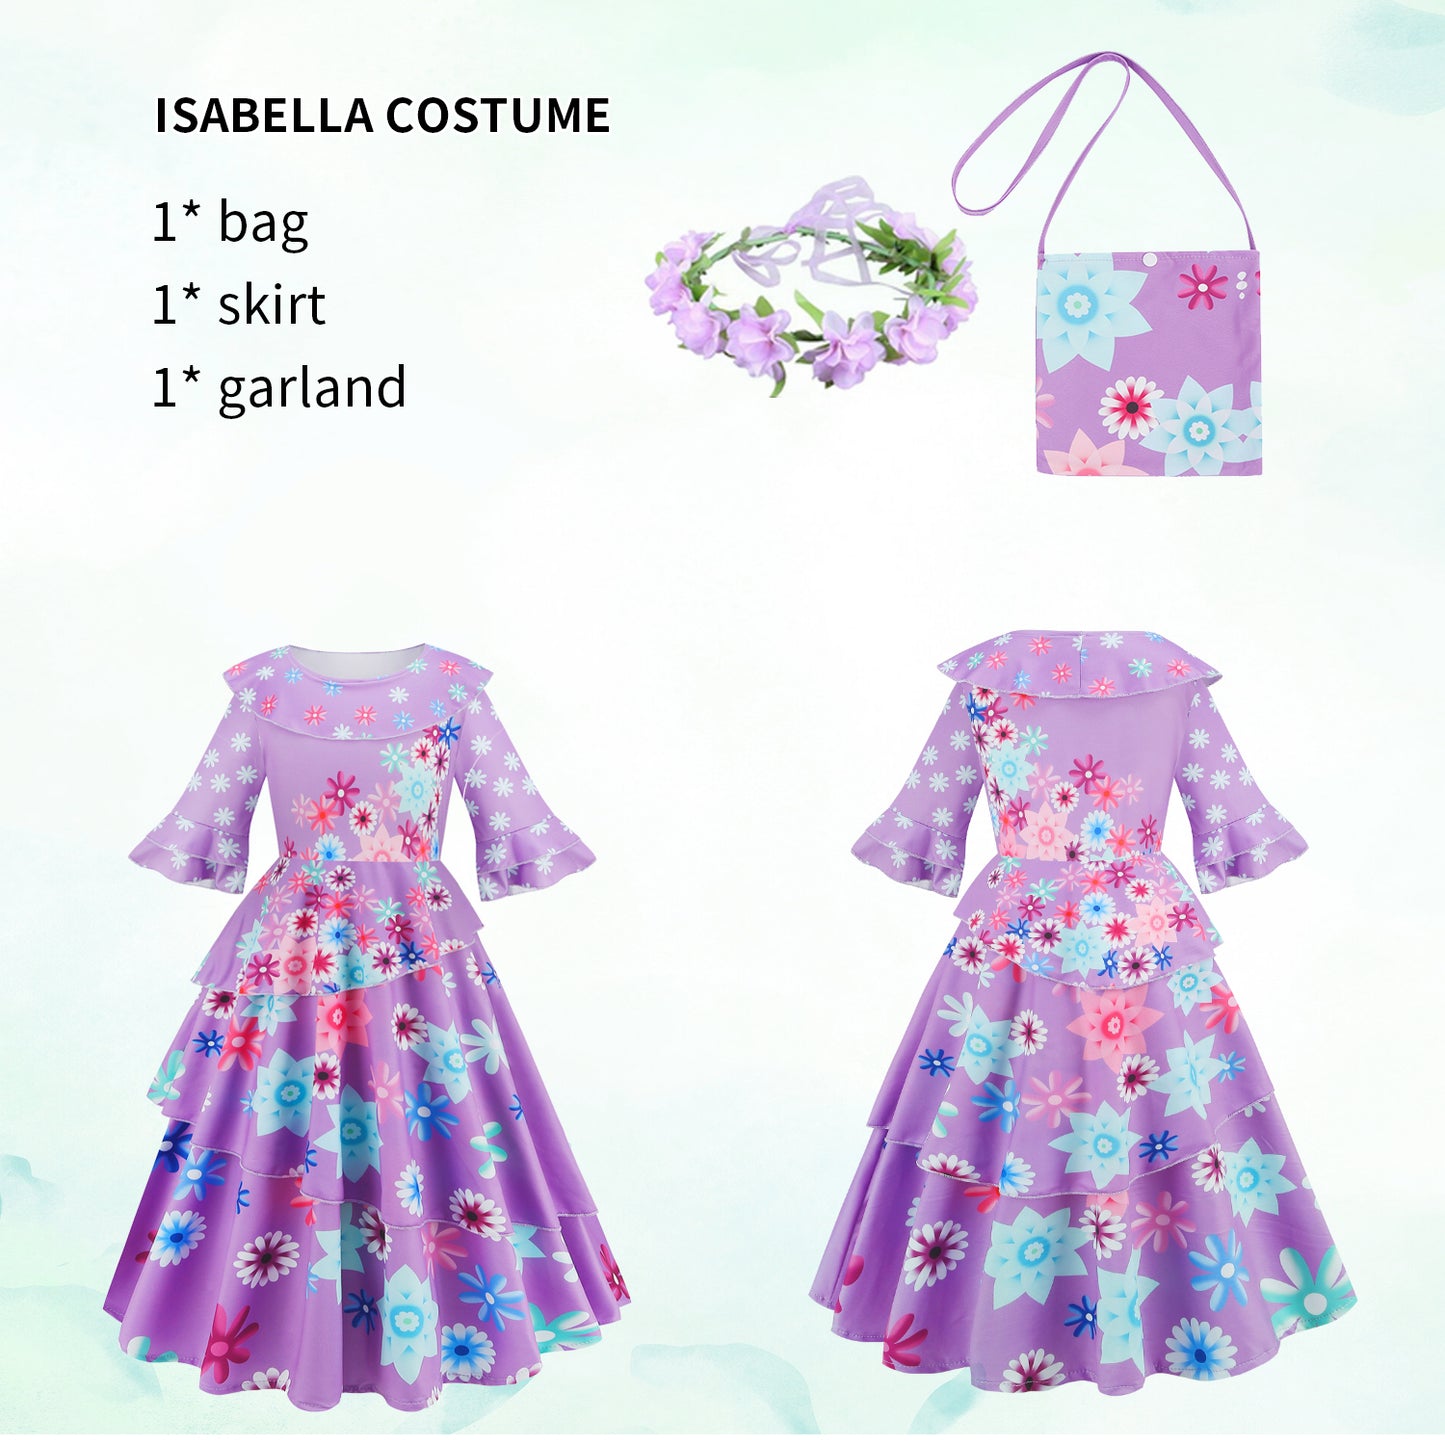 Foierp Princess Cosplay - Costume Dress with Garland and Bag